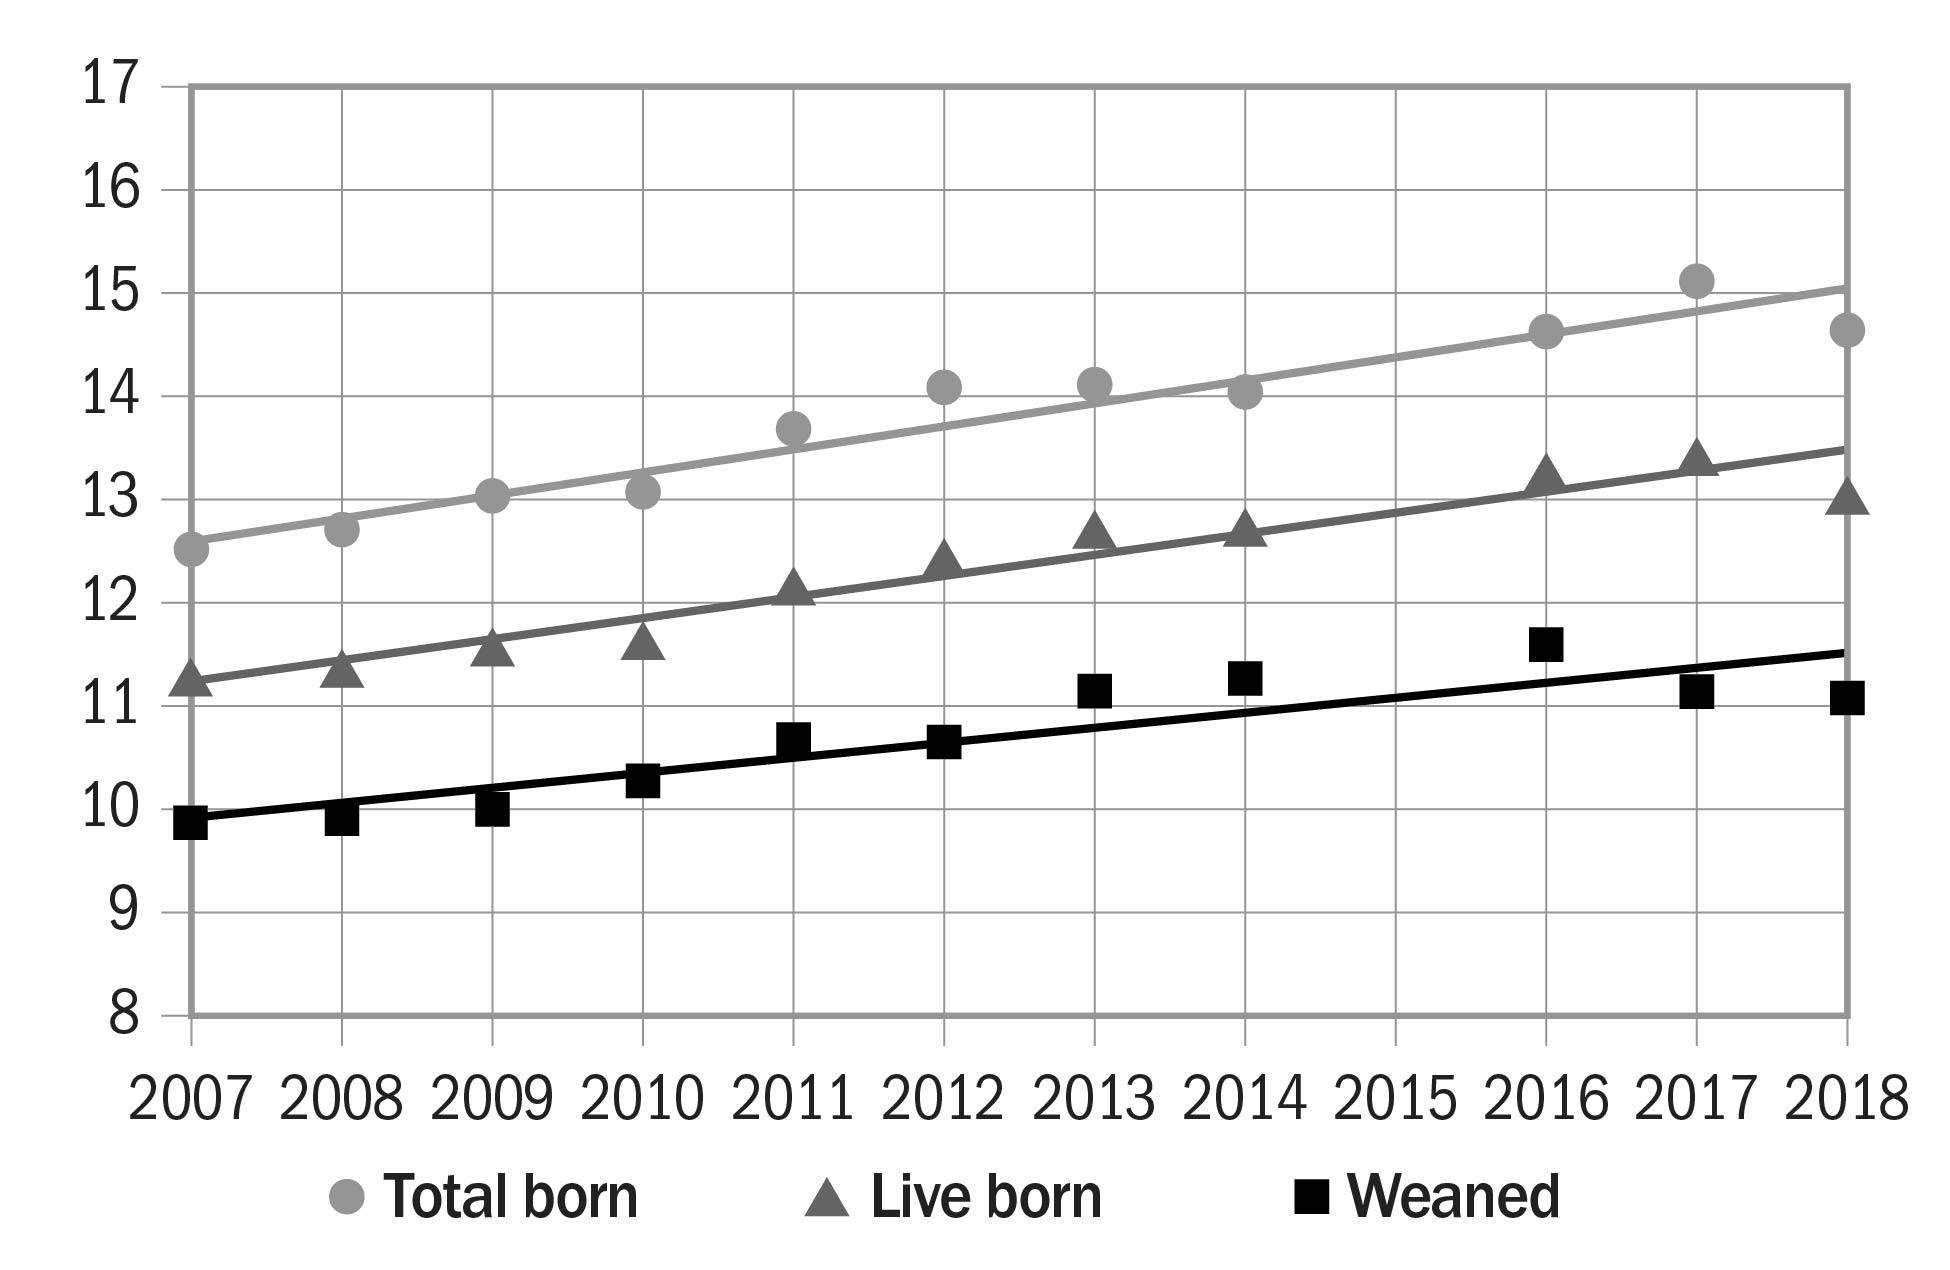 Graph with three lines drawn from left to right. Left axis has the numbers 8 to 17 listed from bottom to top going up in increments of 1. The years 2007 to 2018 are listed from left to right across the bottom of the graph. The top line shows total piglets born. The middle line shows piglets born alive. Bottom line shows piglets weaned per litter.